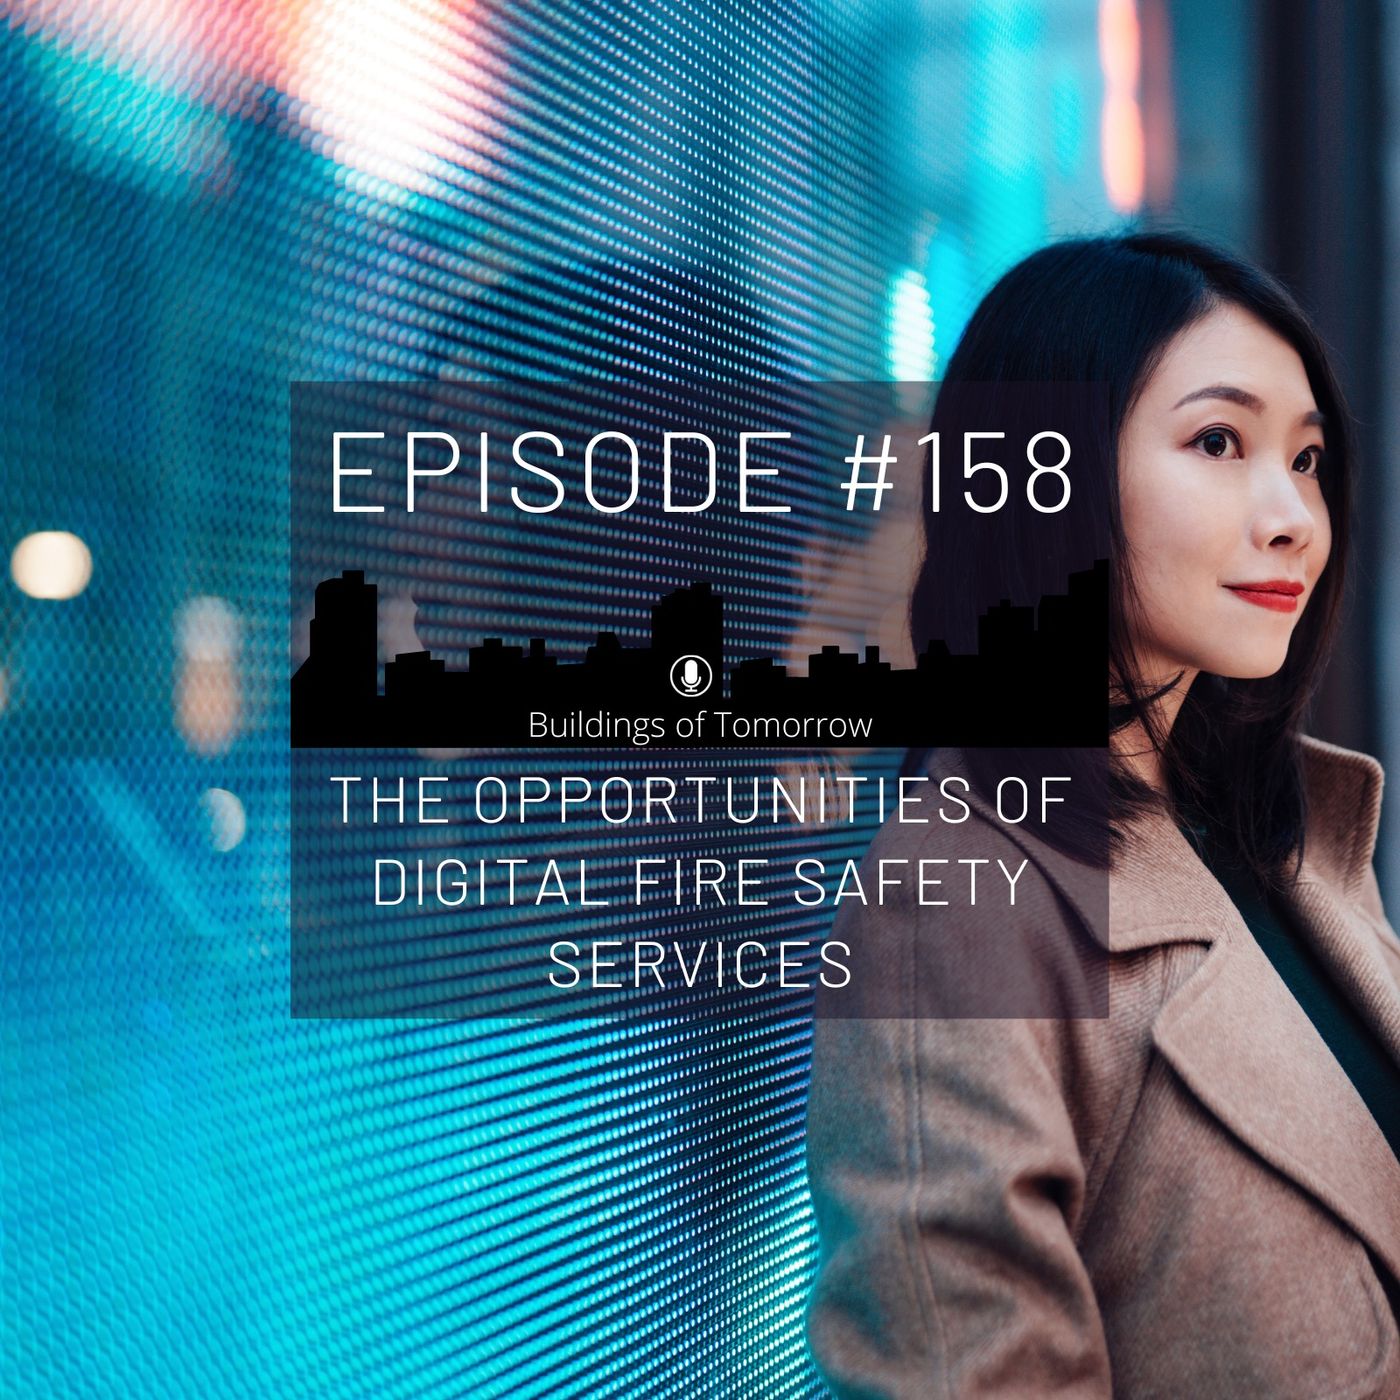 #158 The opportunities of digital fire safety services